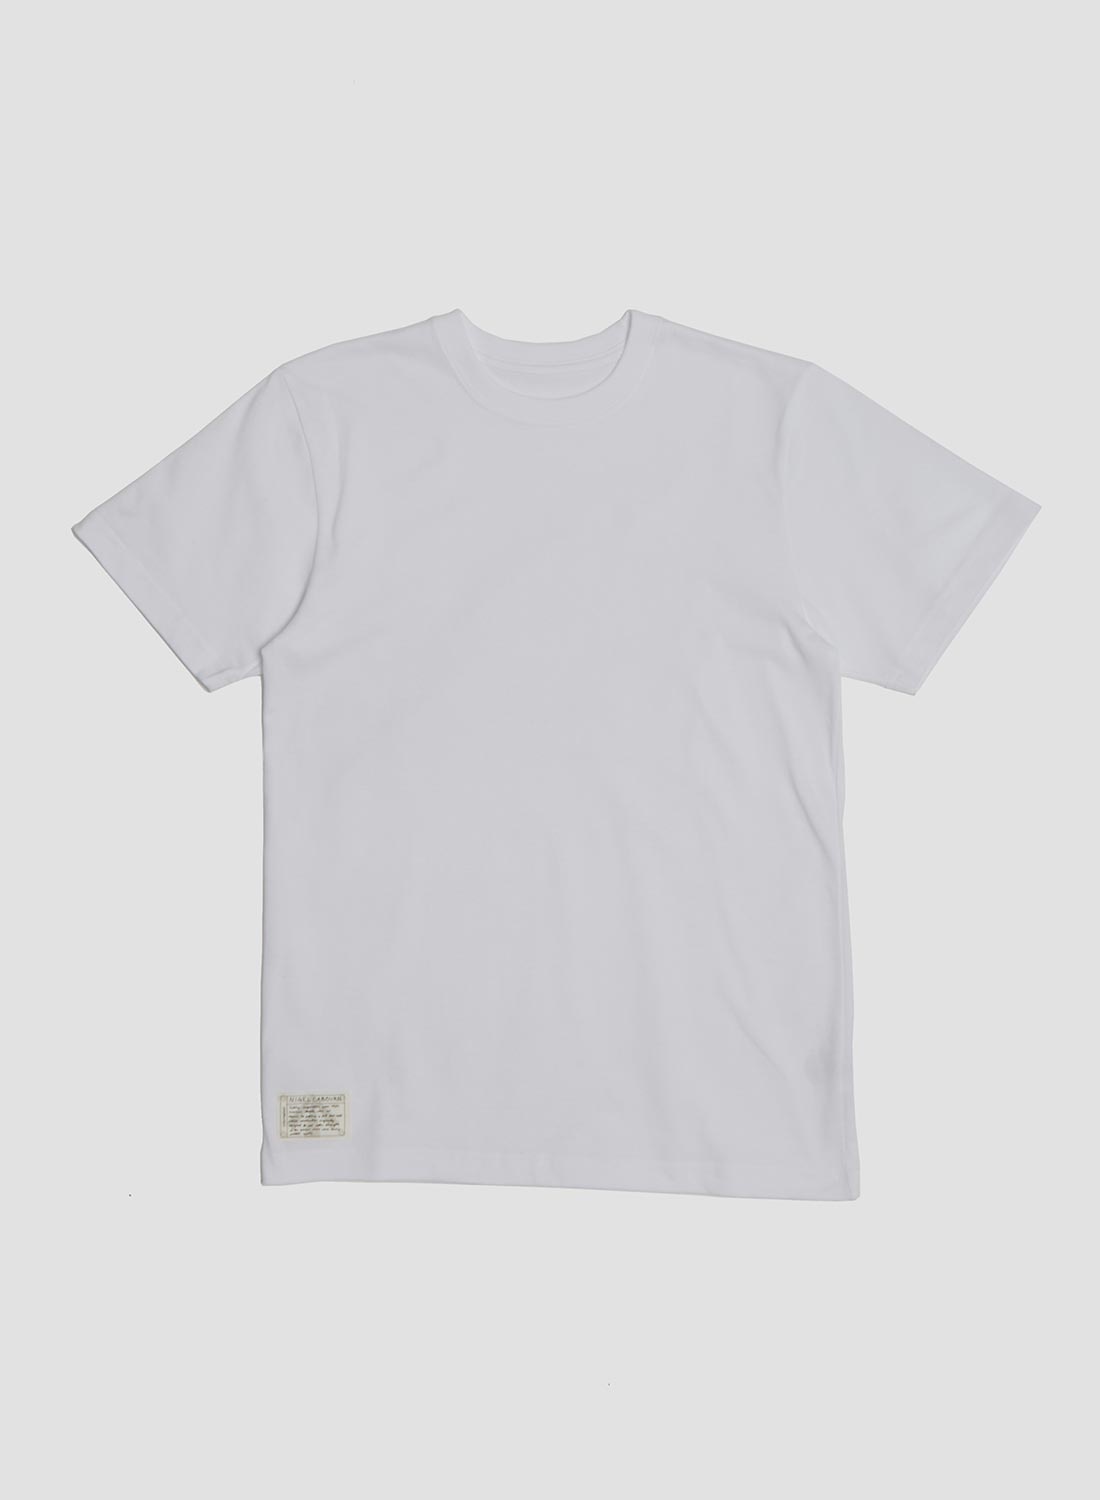 Heavy Duty Athletic T-Shirt in White - 1